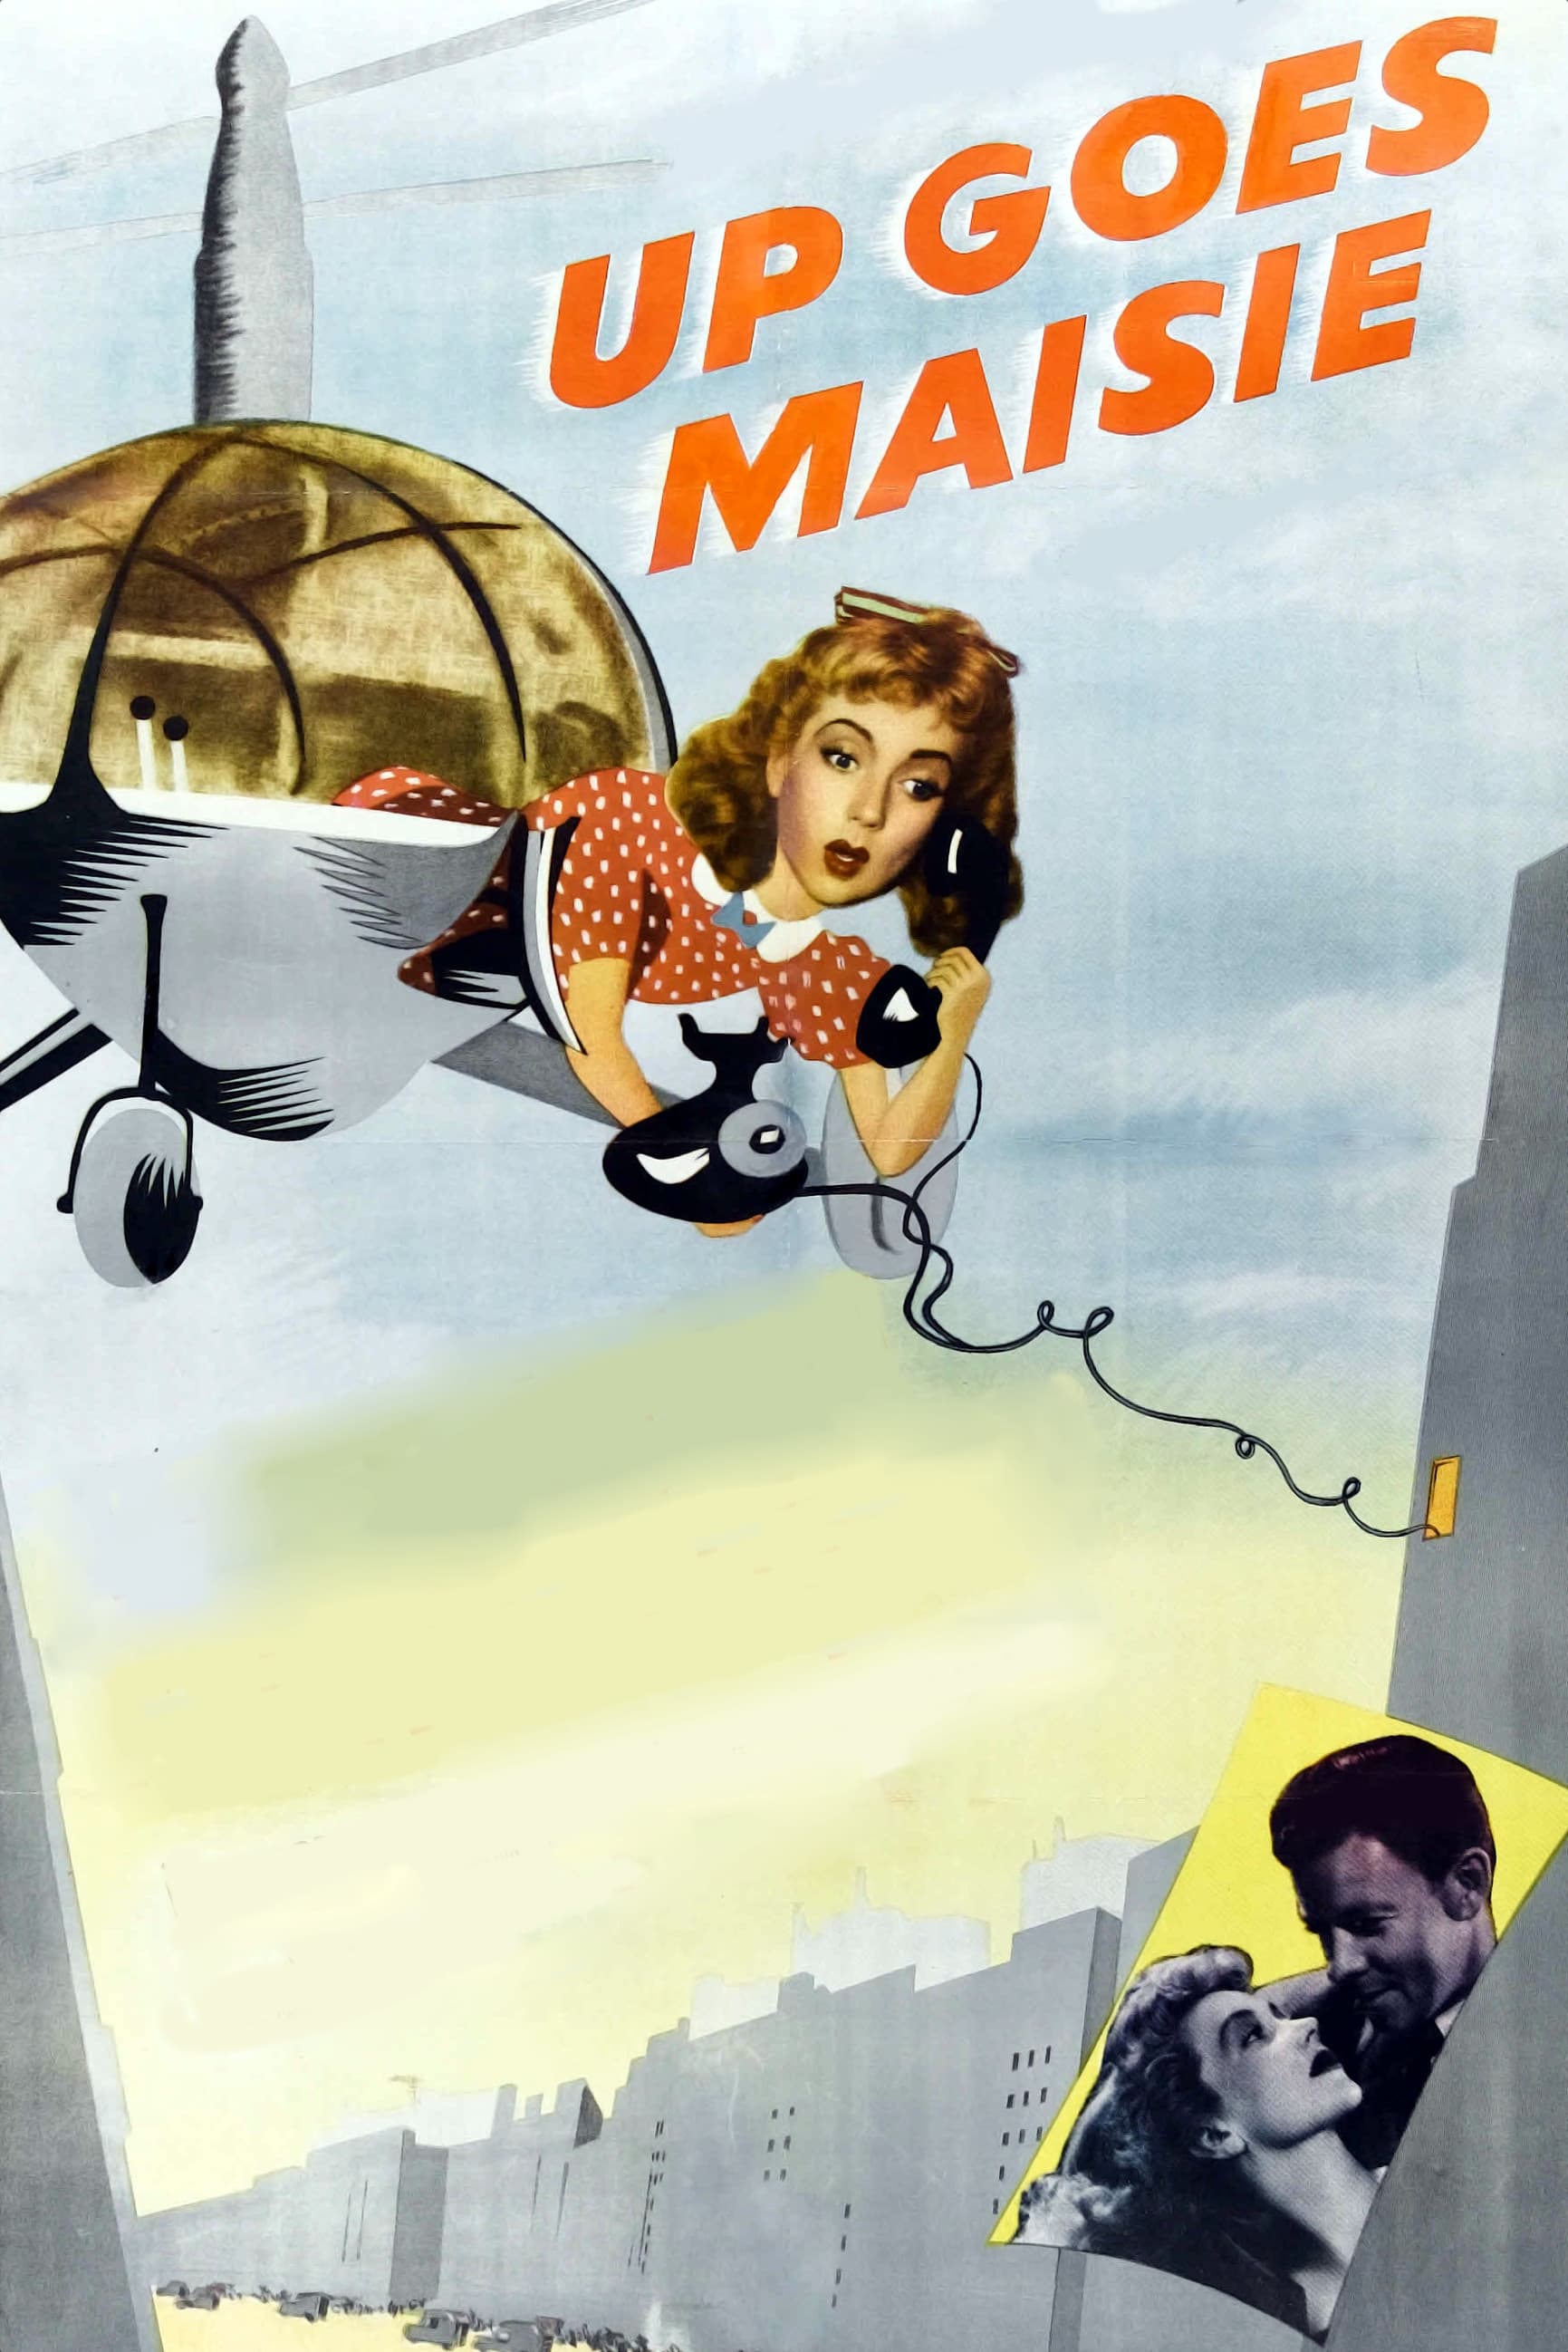 Up Goes Maisie (1946)